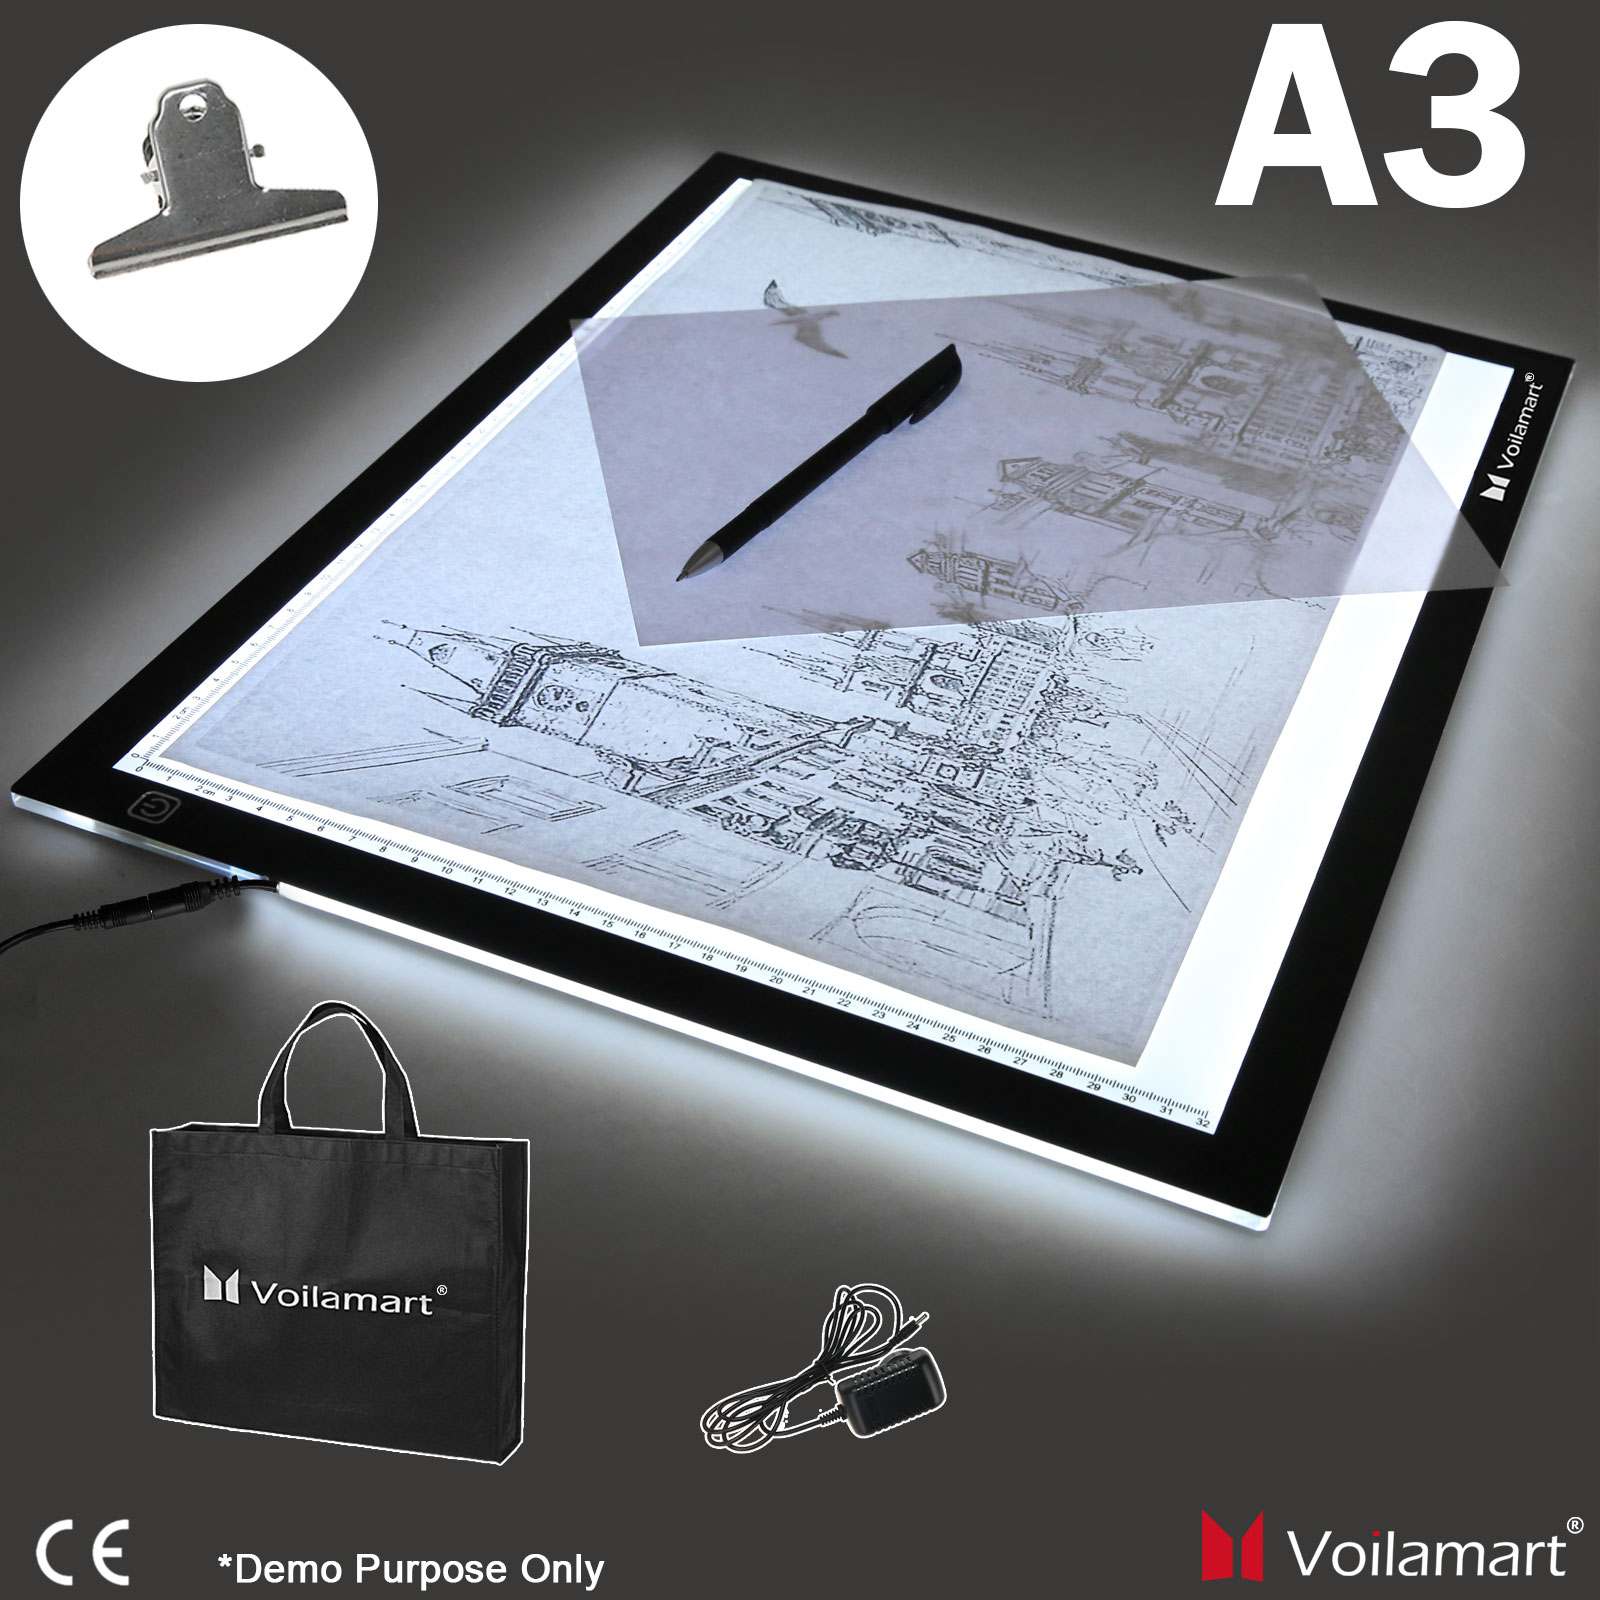 Details About A3 Led Light Box Tracing Board Art Design Stencil Drawing  Thin Pad Copy Led Box